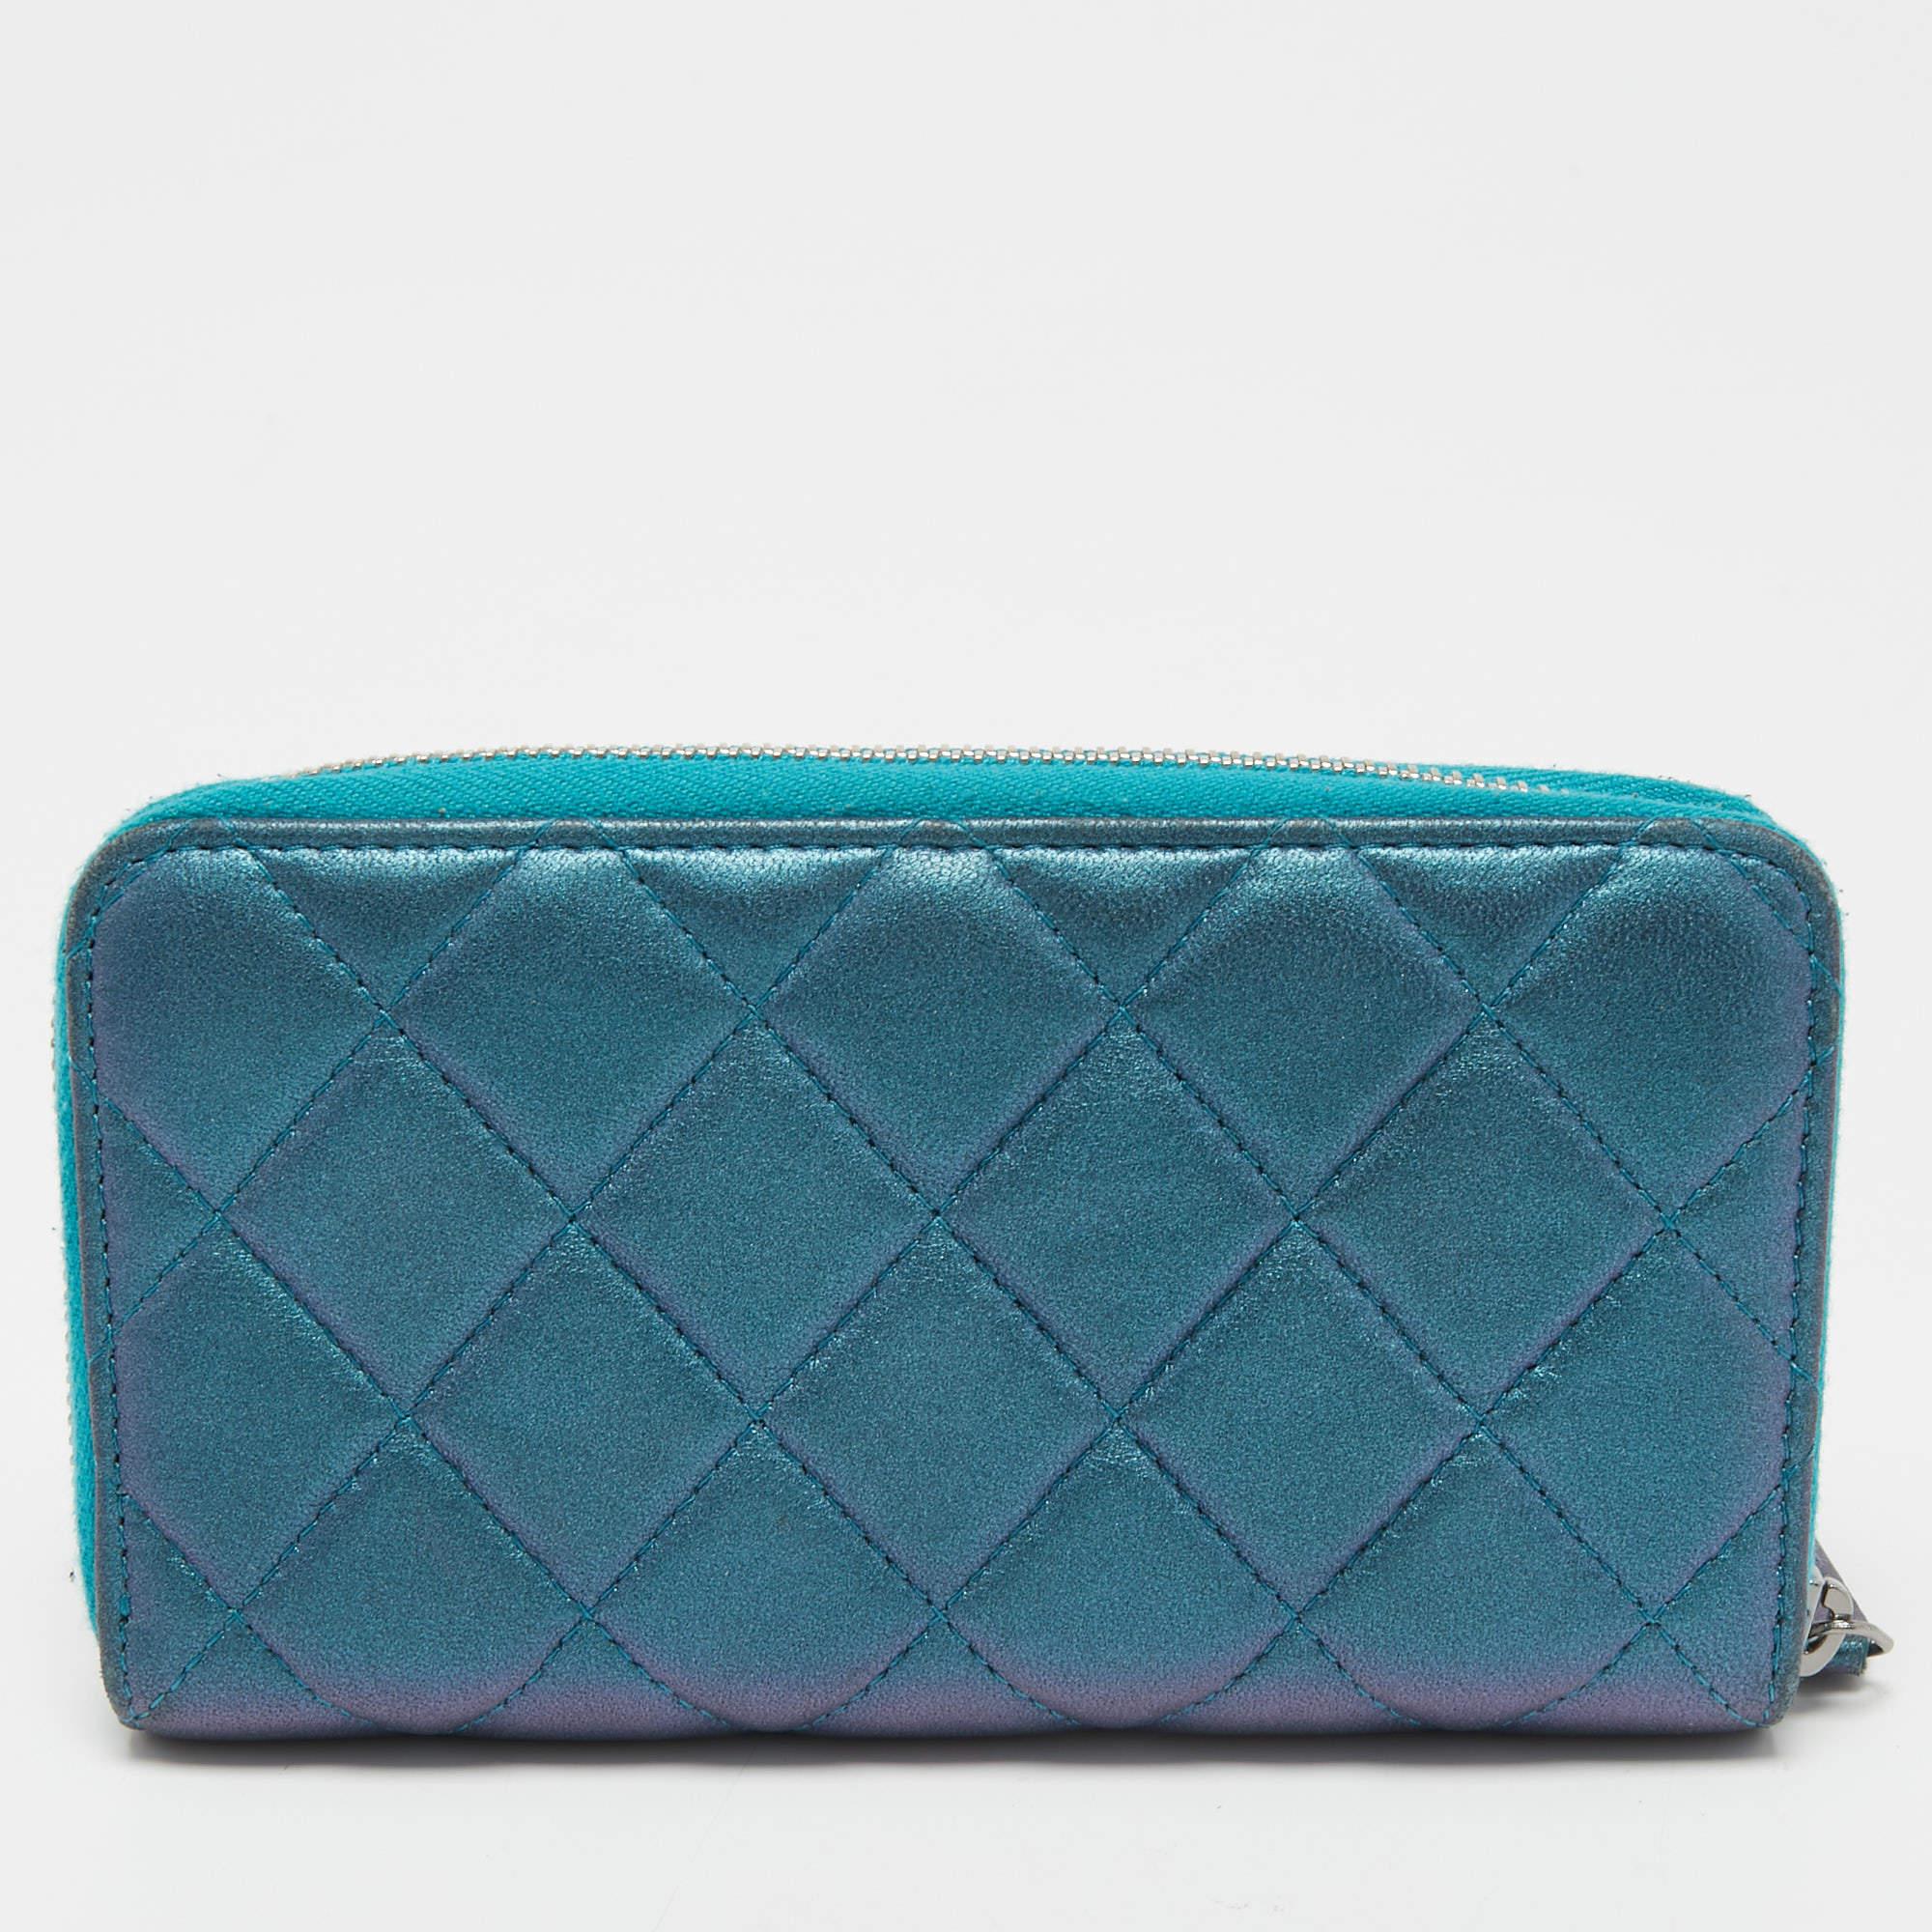 With a functional structure, this Chanel wallet is the epitome of sophistication and feminine style. It is meticulously created from quilted leather, and the 'CC' motif on the front lends it a luxe update. Designed in a classy blue hue, its